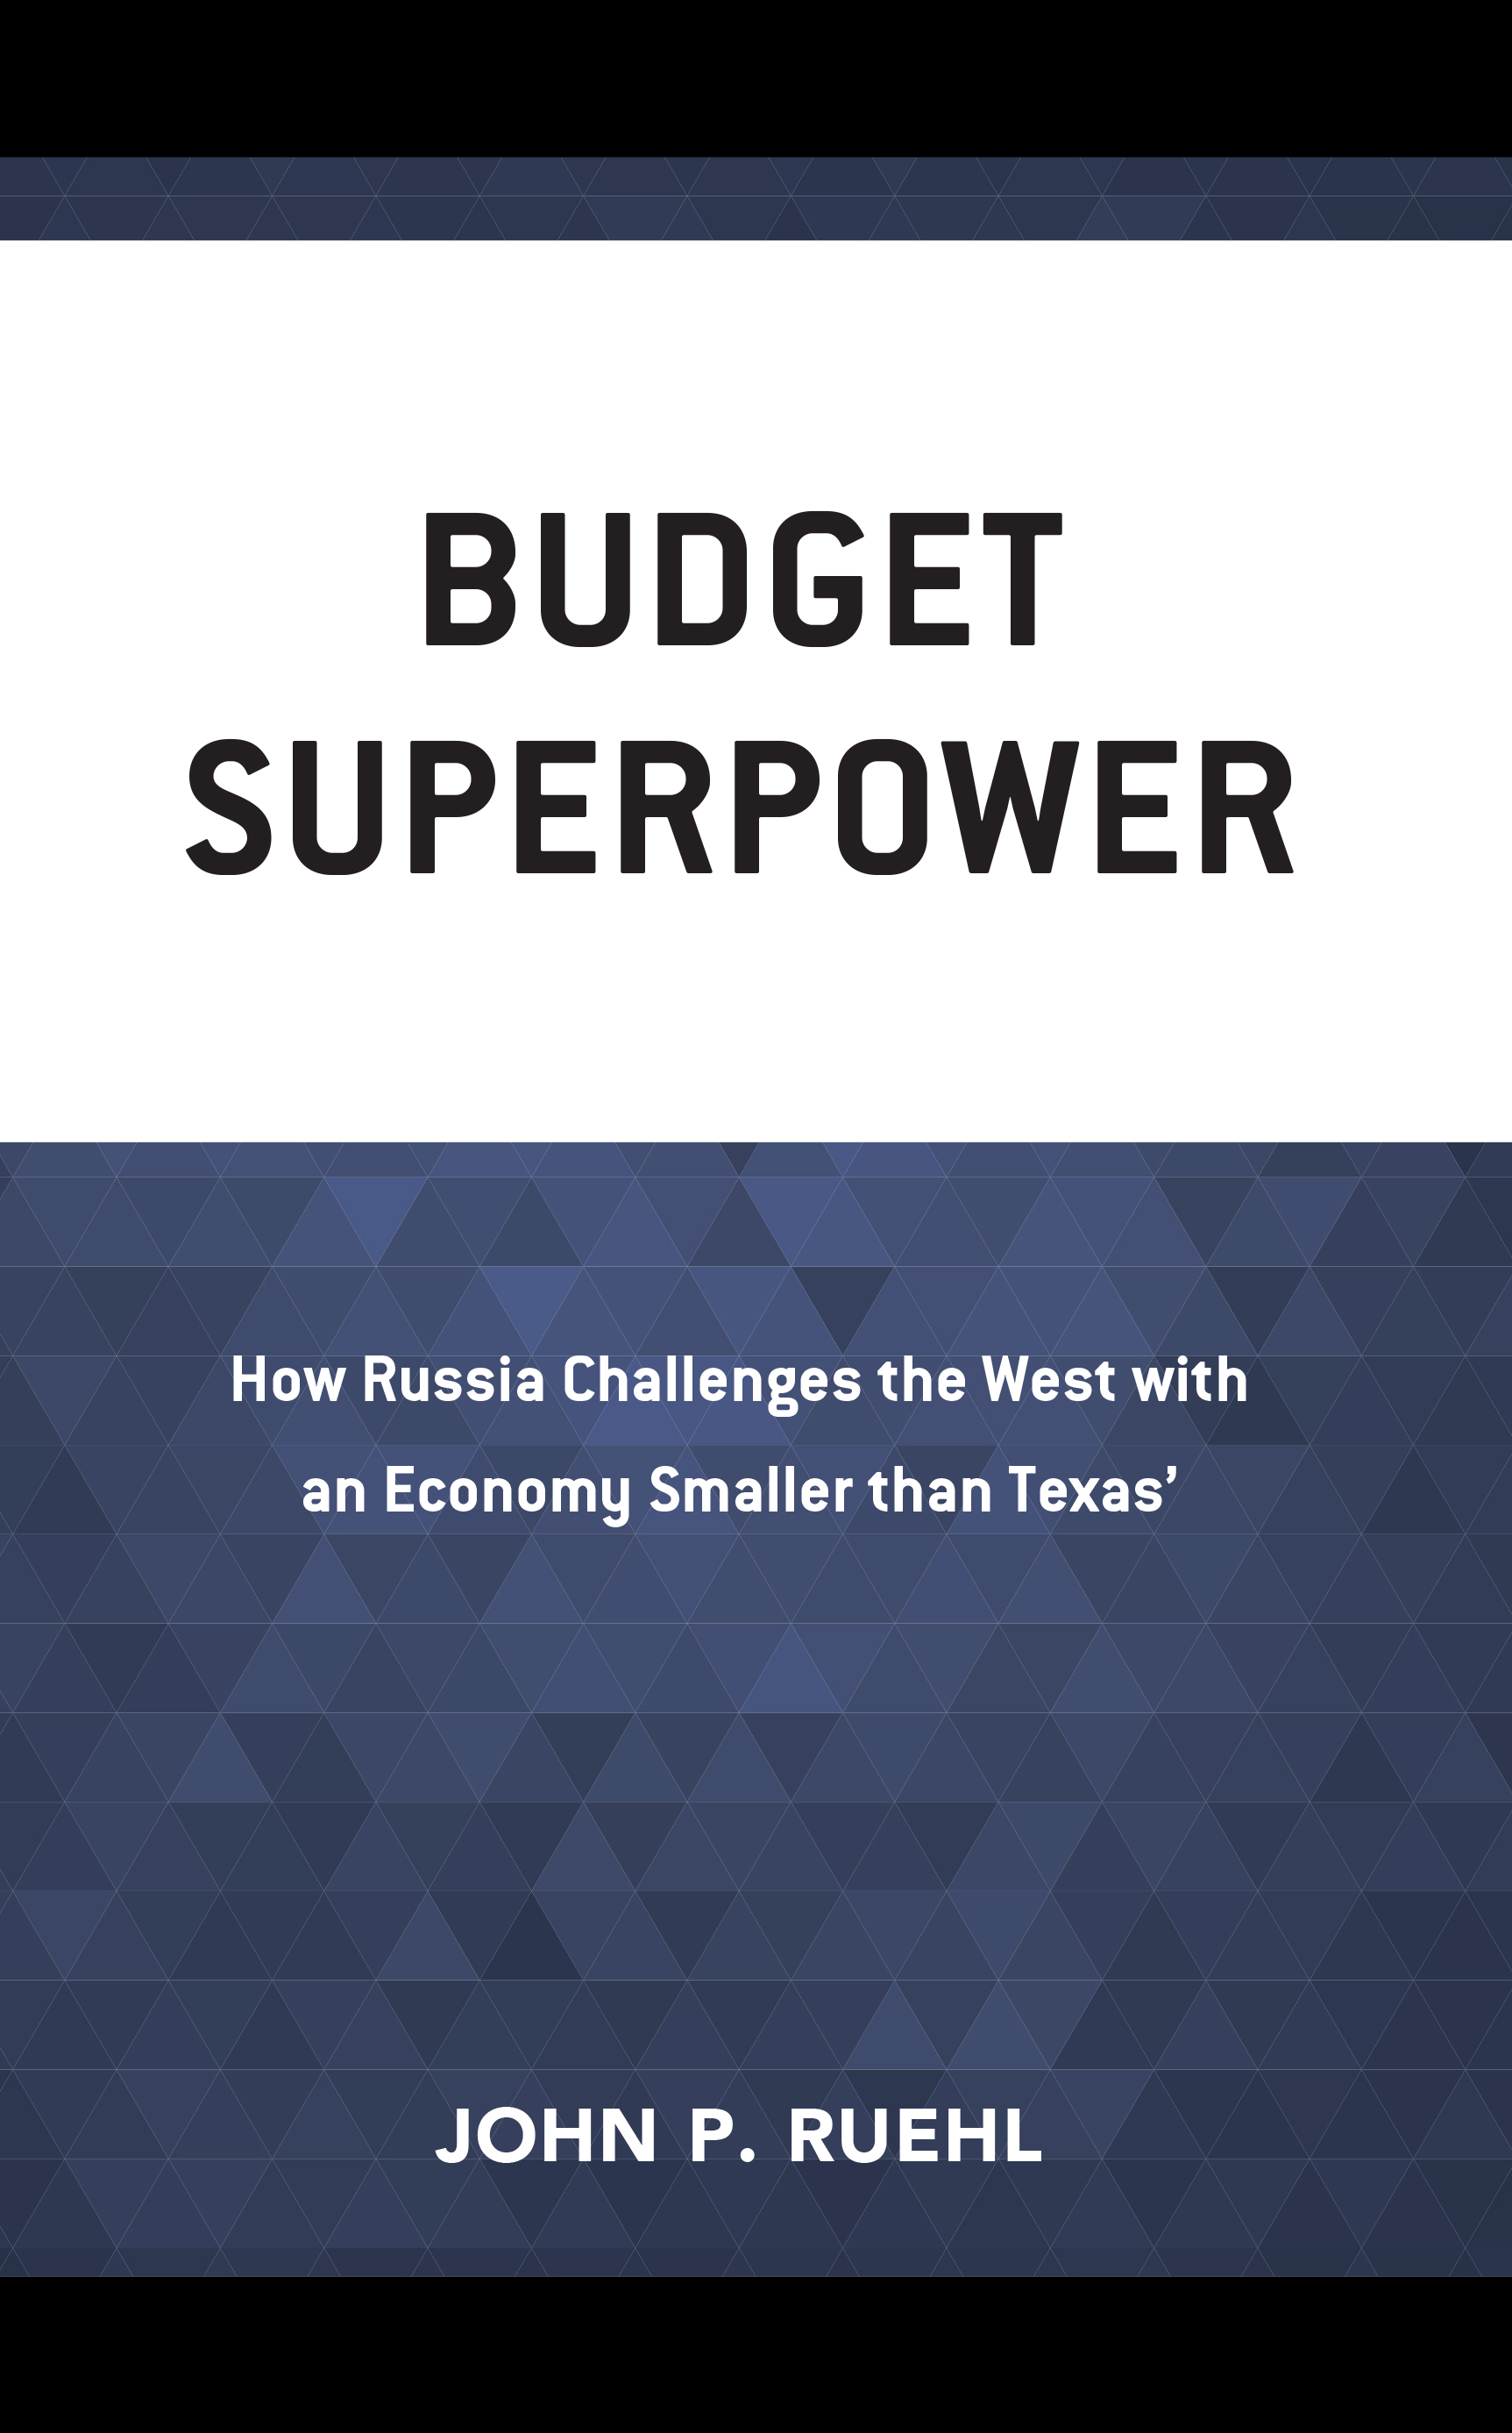 Budget Superpower: How Russia Challenges the West with An Economy Smaller than Texas'